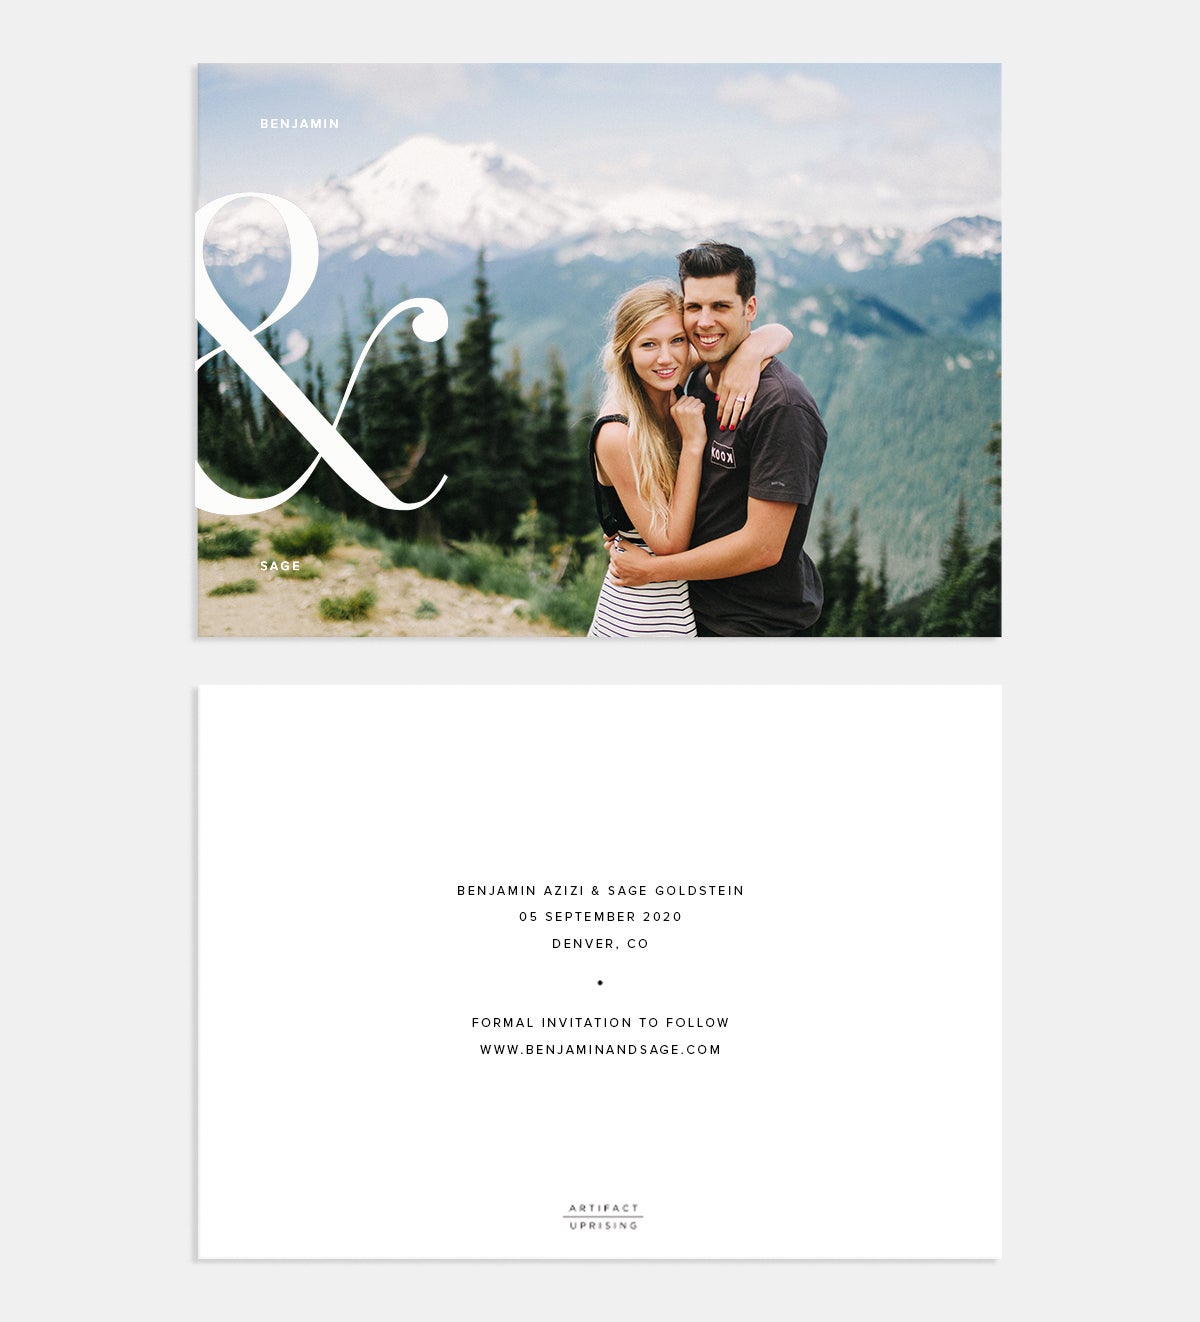 Ampersand Save the Date Card by Artifact Uprising